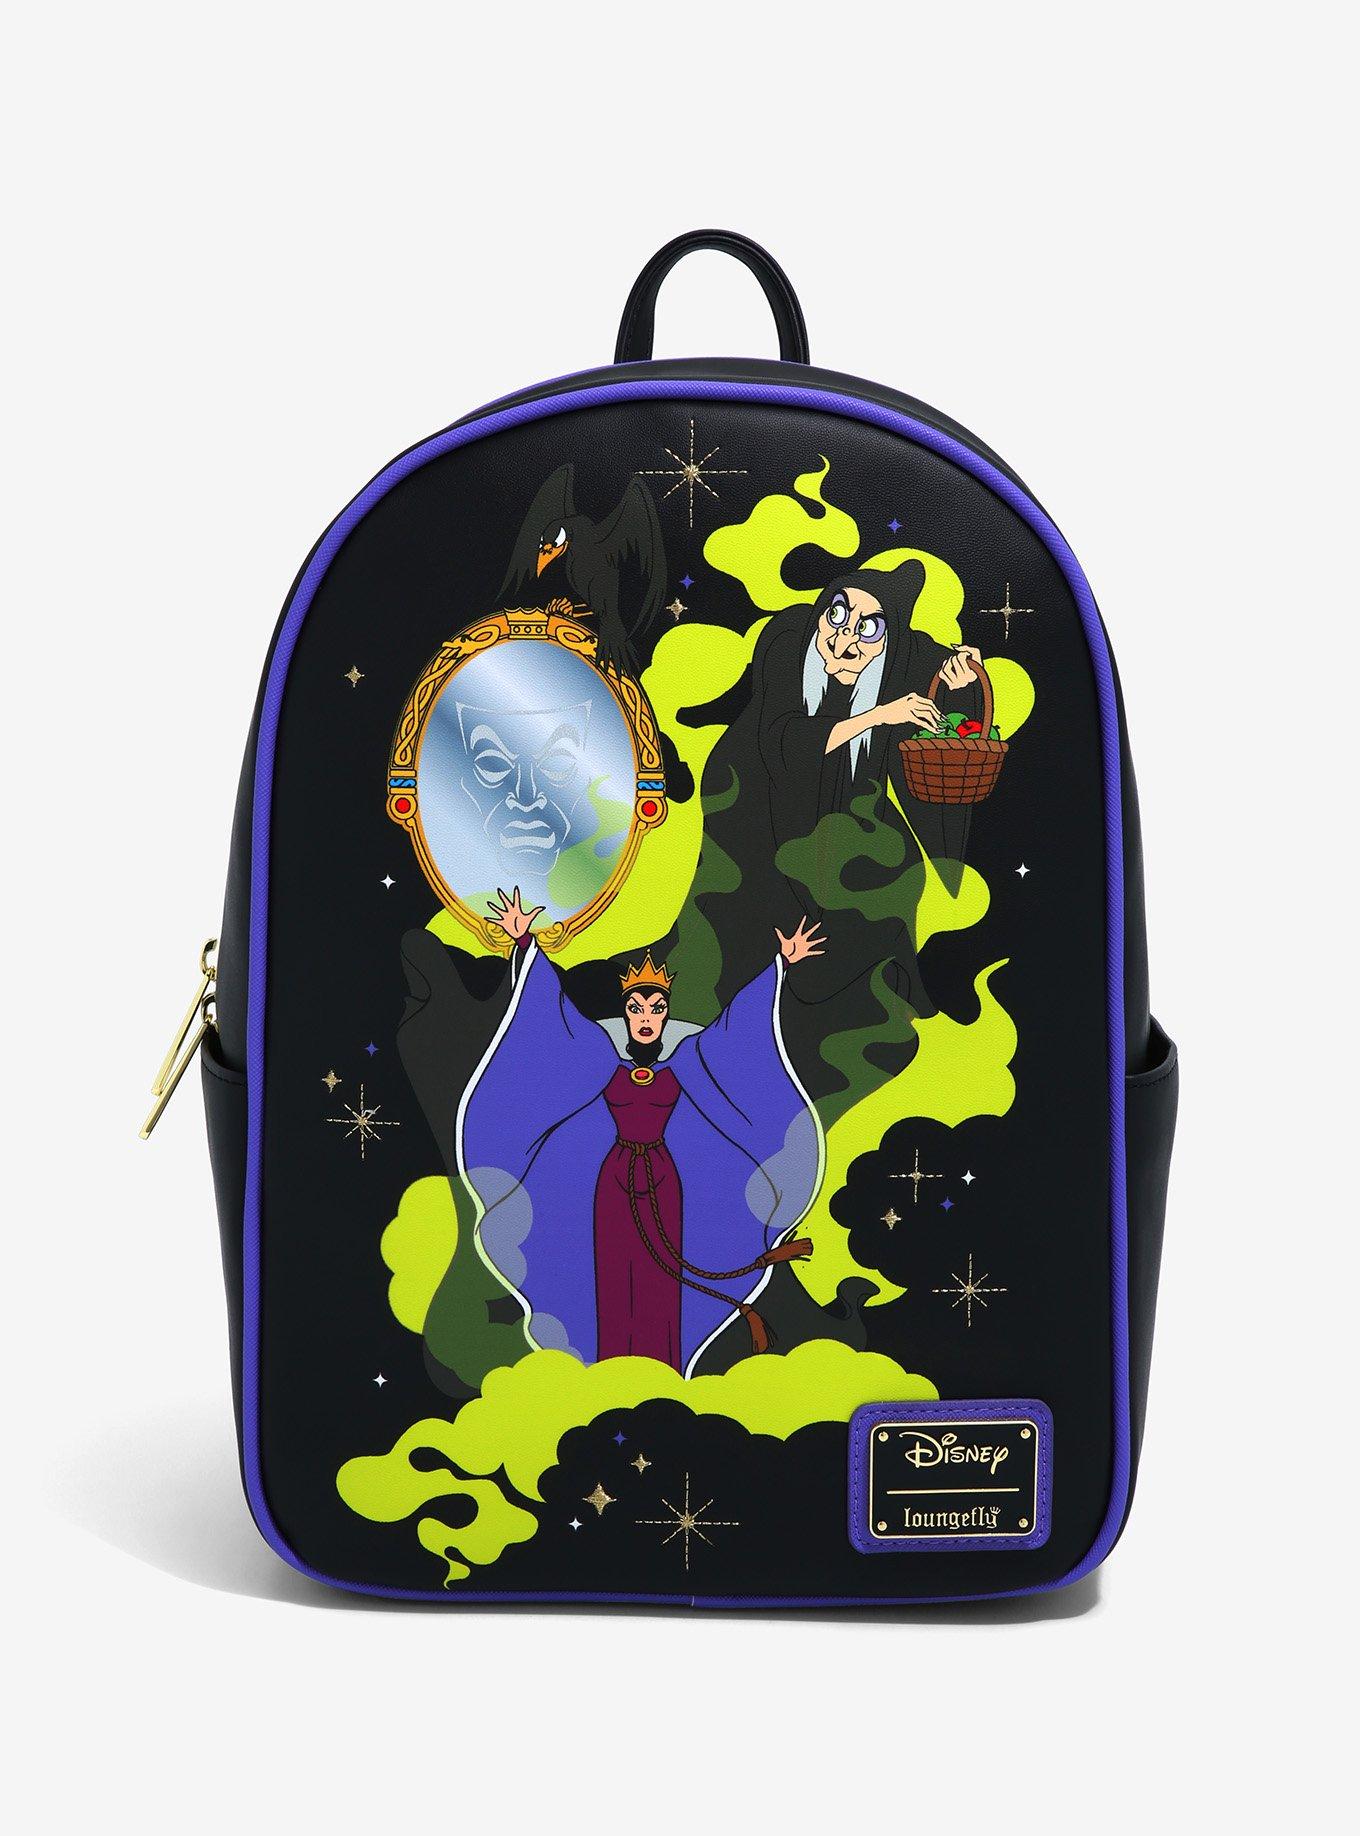 Disney - Evil Queen Mini Backpack, Loungefly